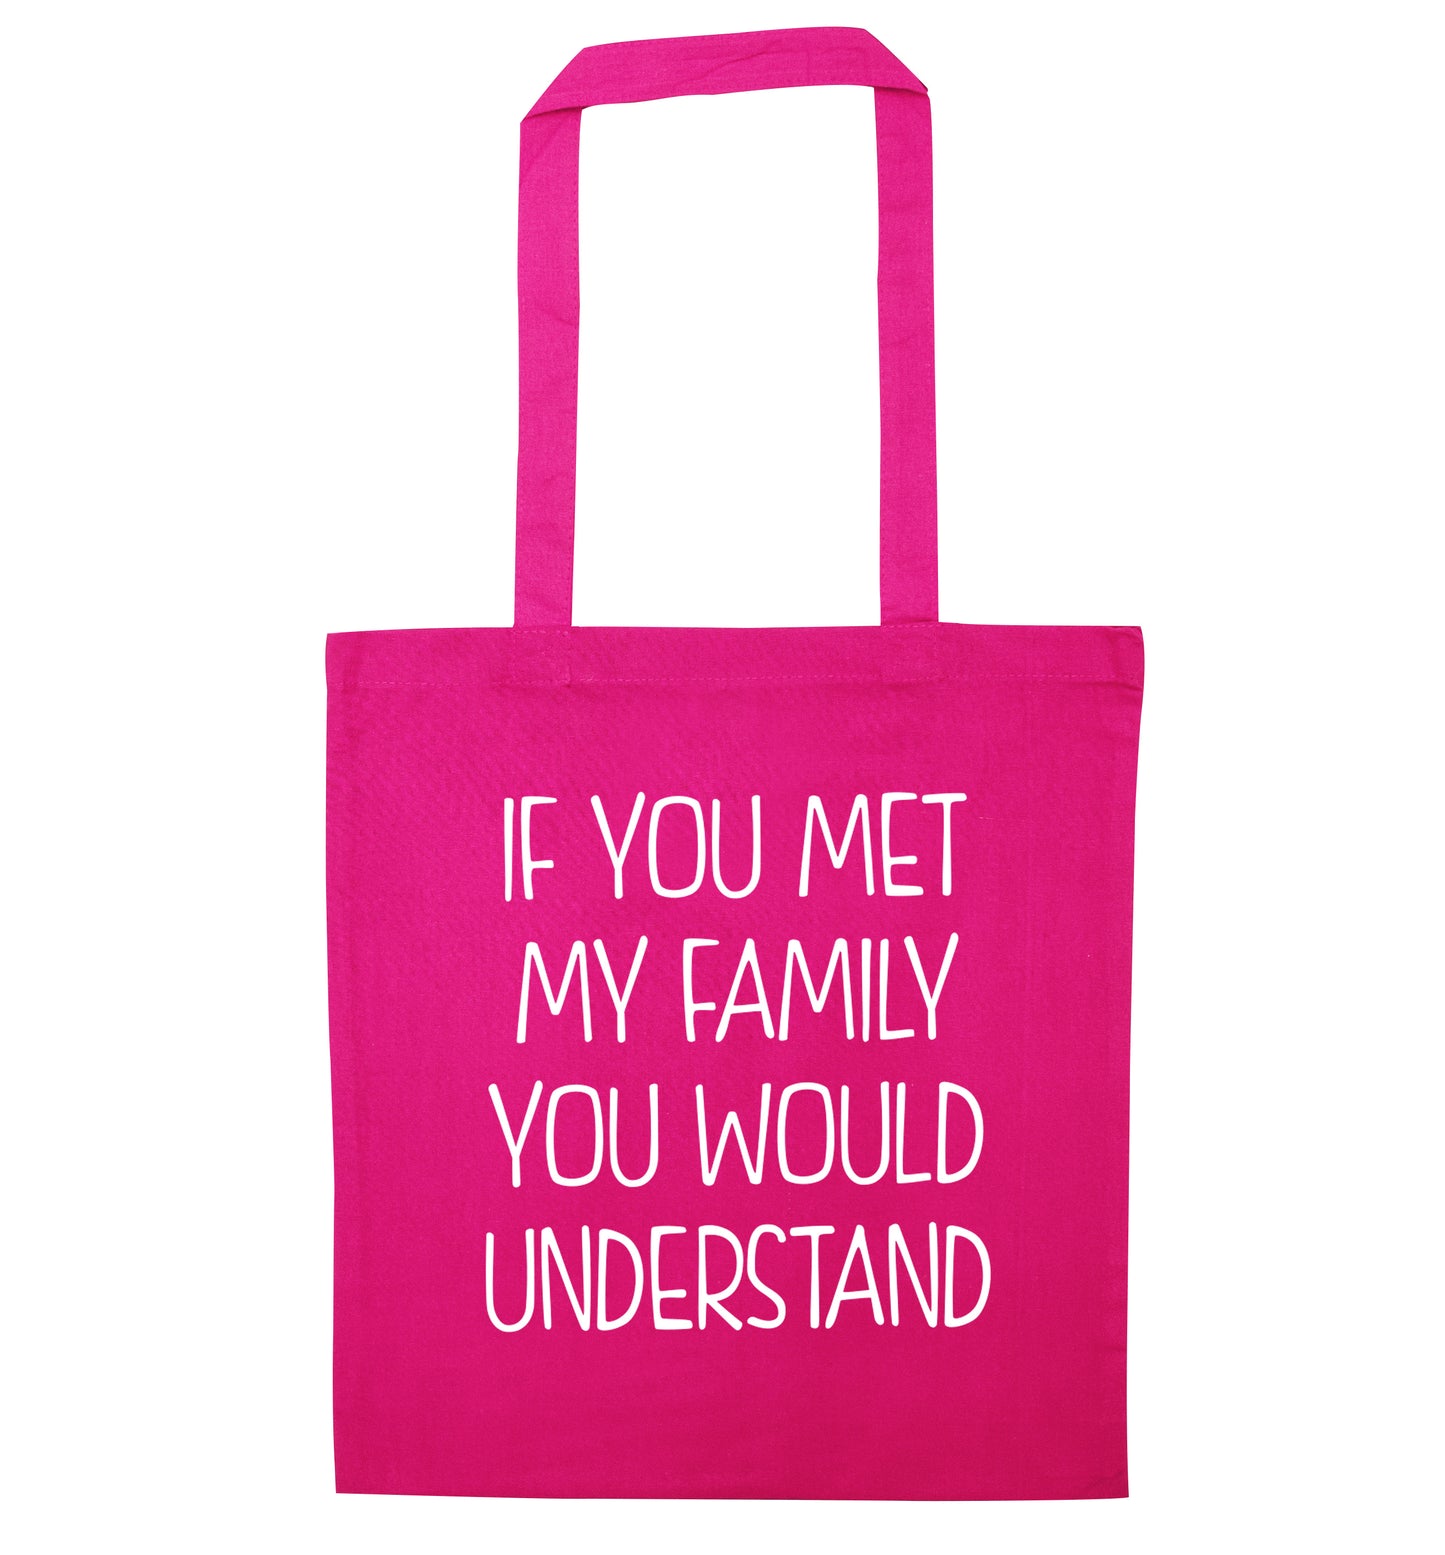 If you met my family you would understand pink tote bag